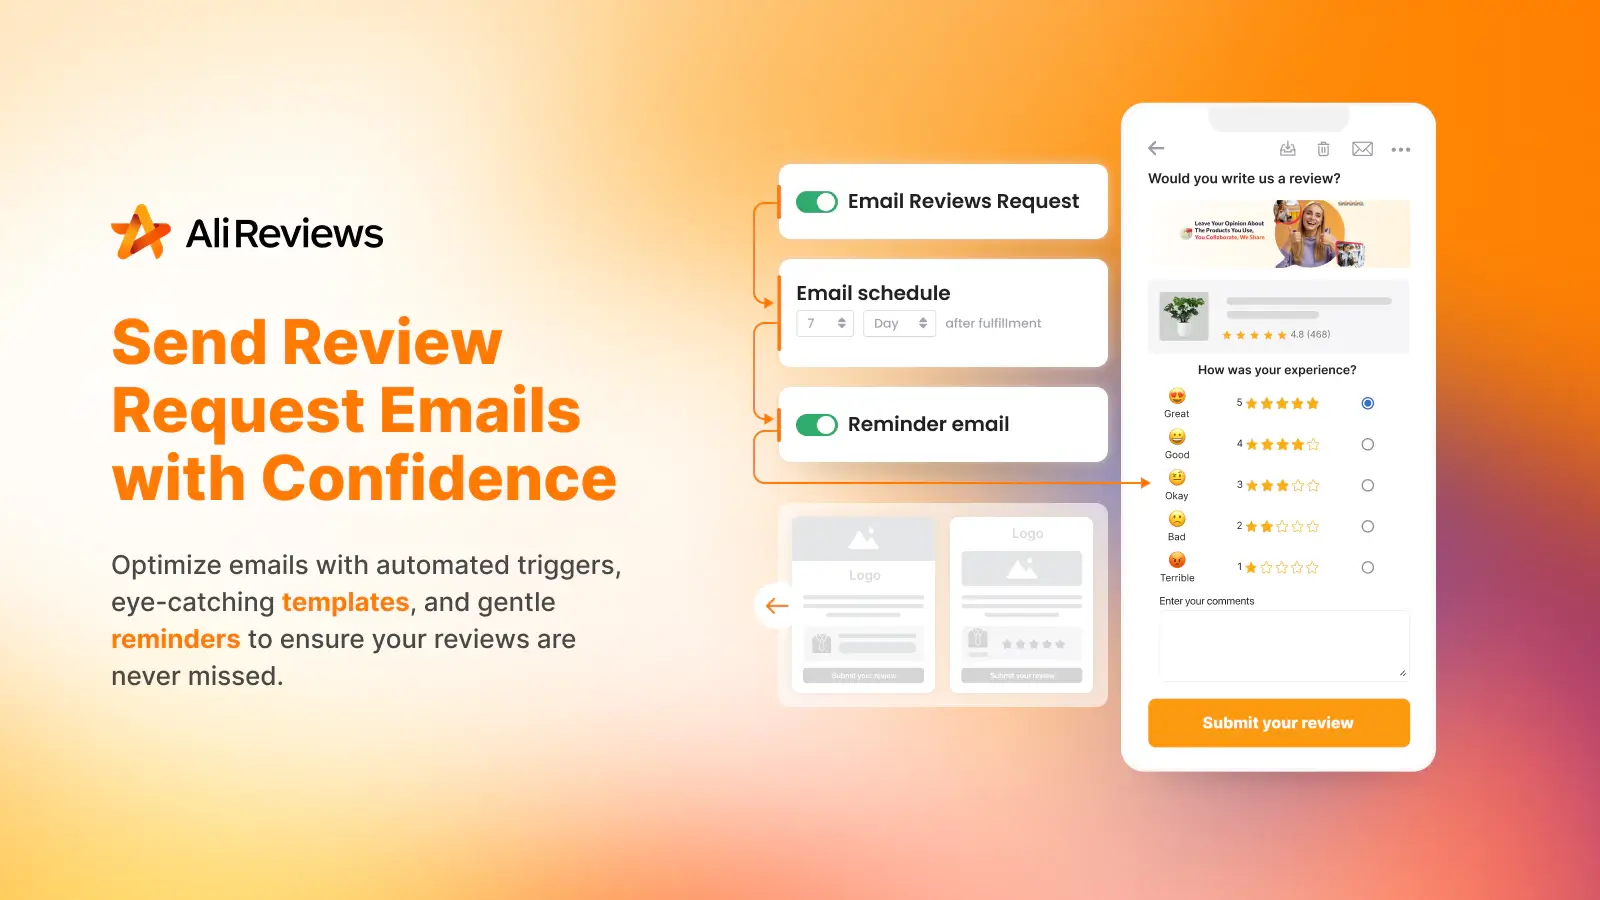 Ali Reviews can help you easily create emails to ask for product video reviews